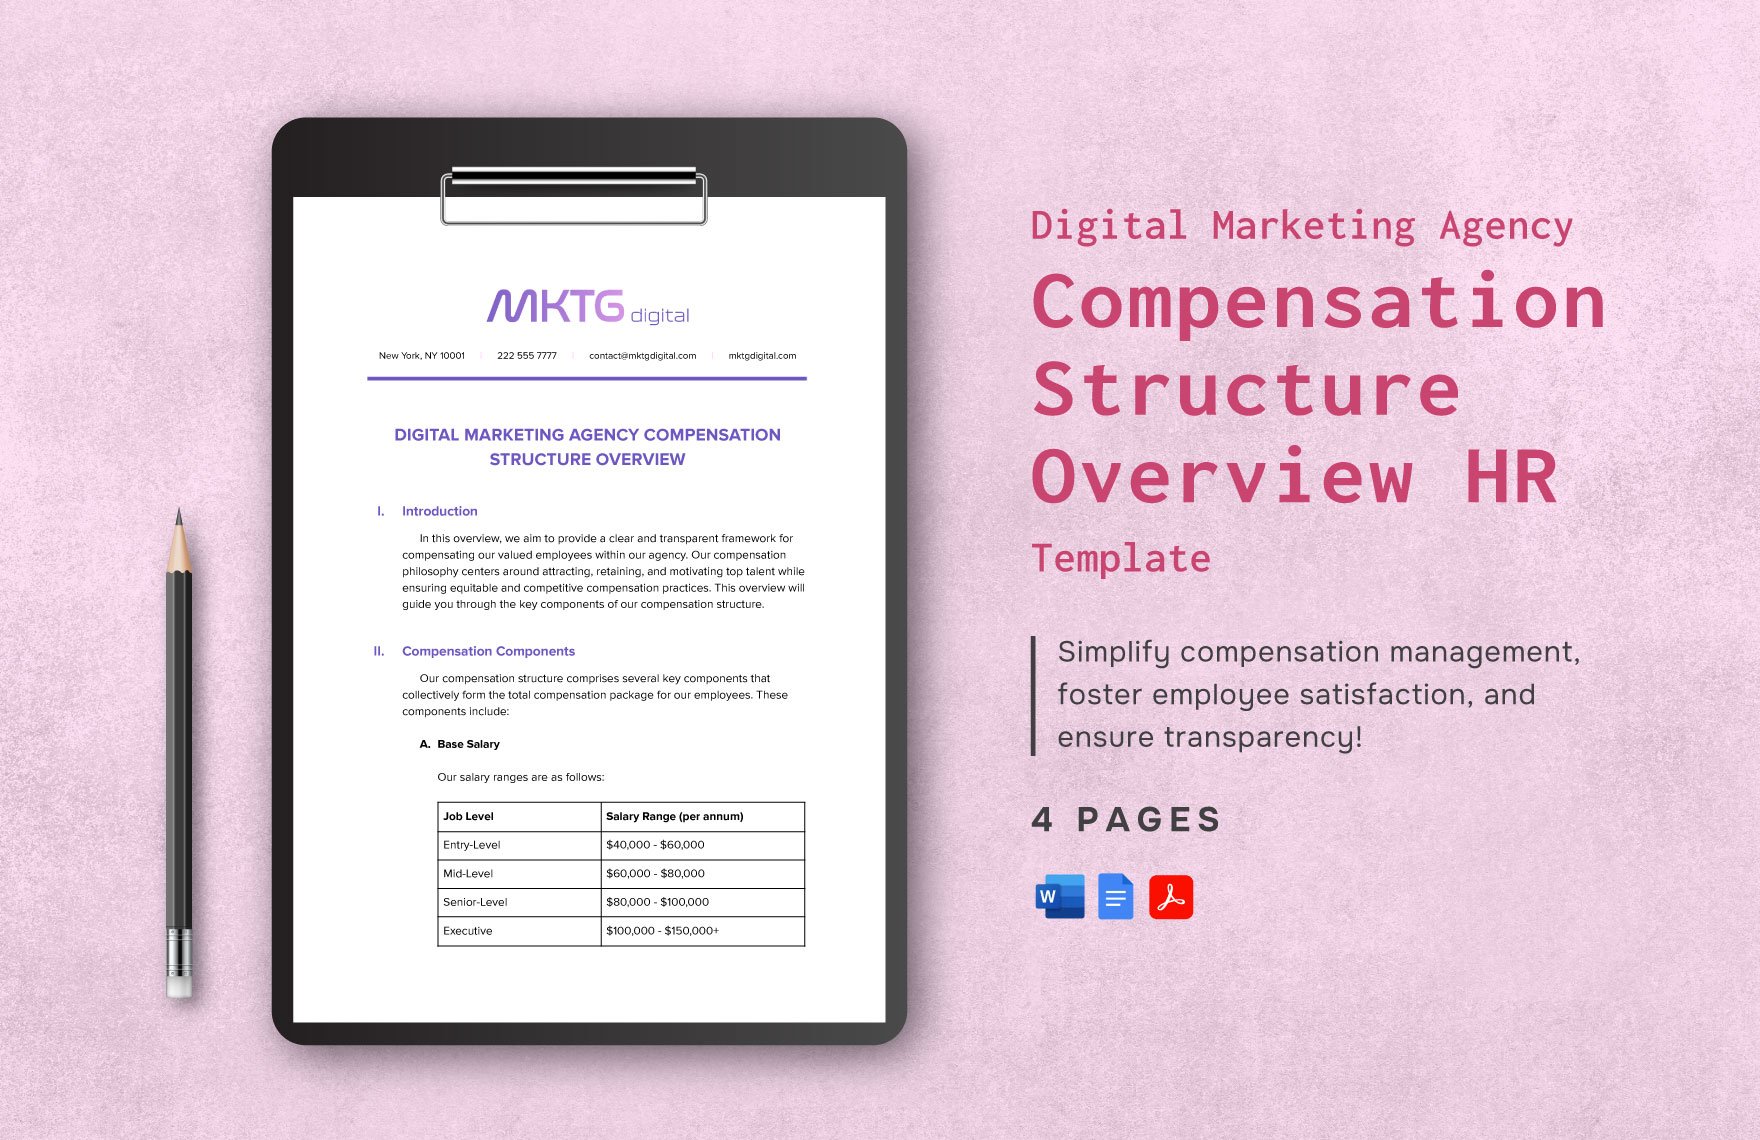 Digital Marketing Agency Compensation Structure Overview HR Template